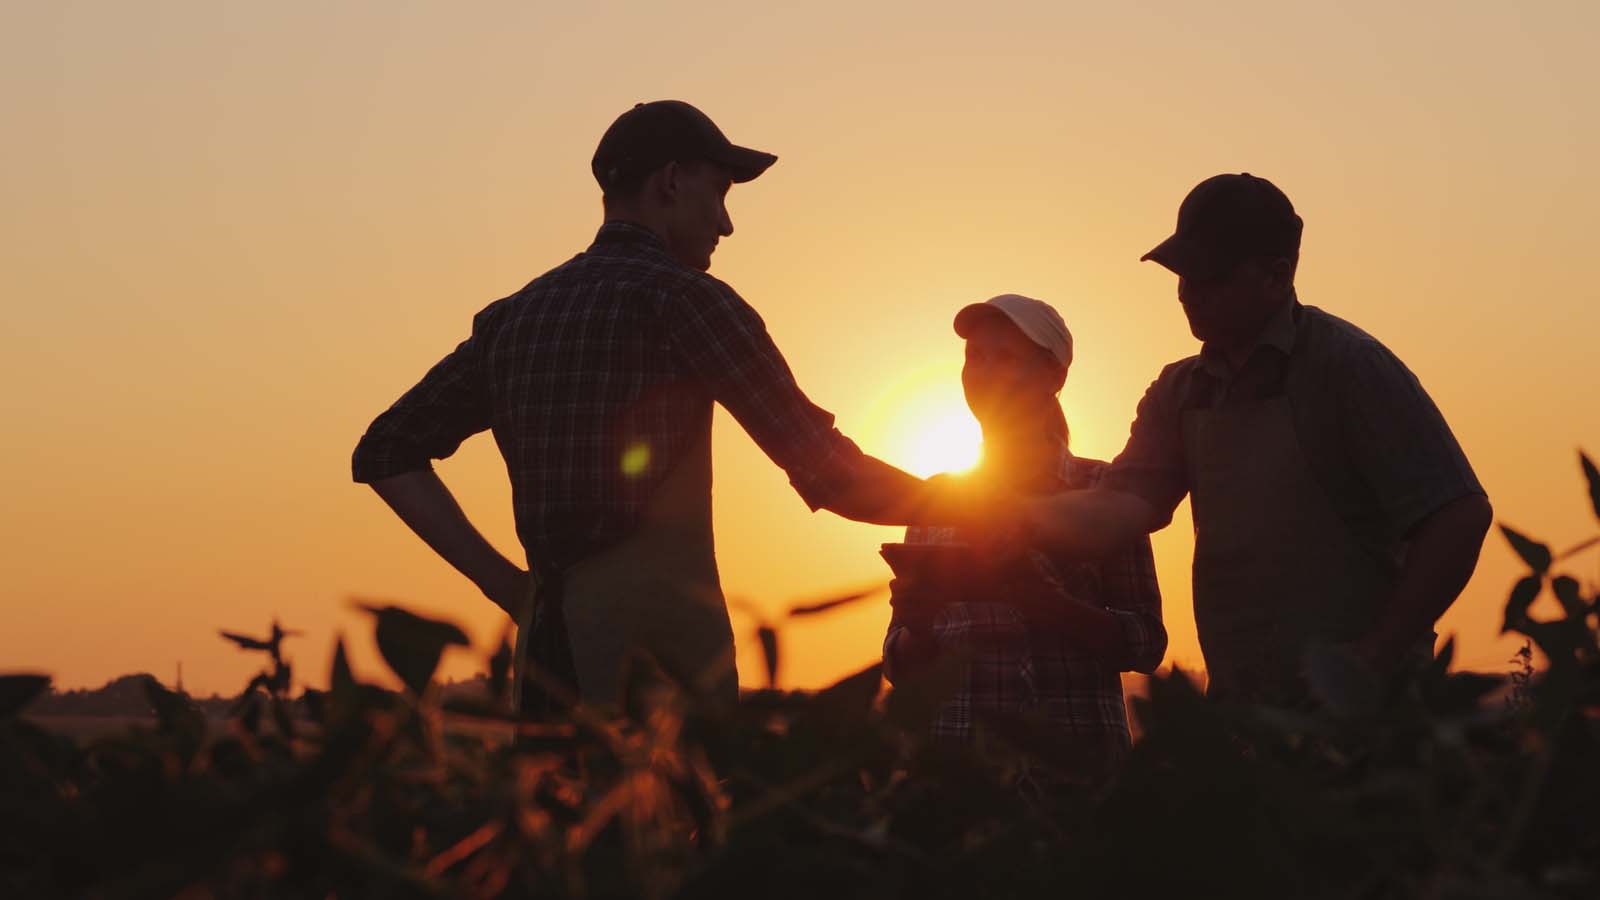 3 farmers standing in a field discussing business